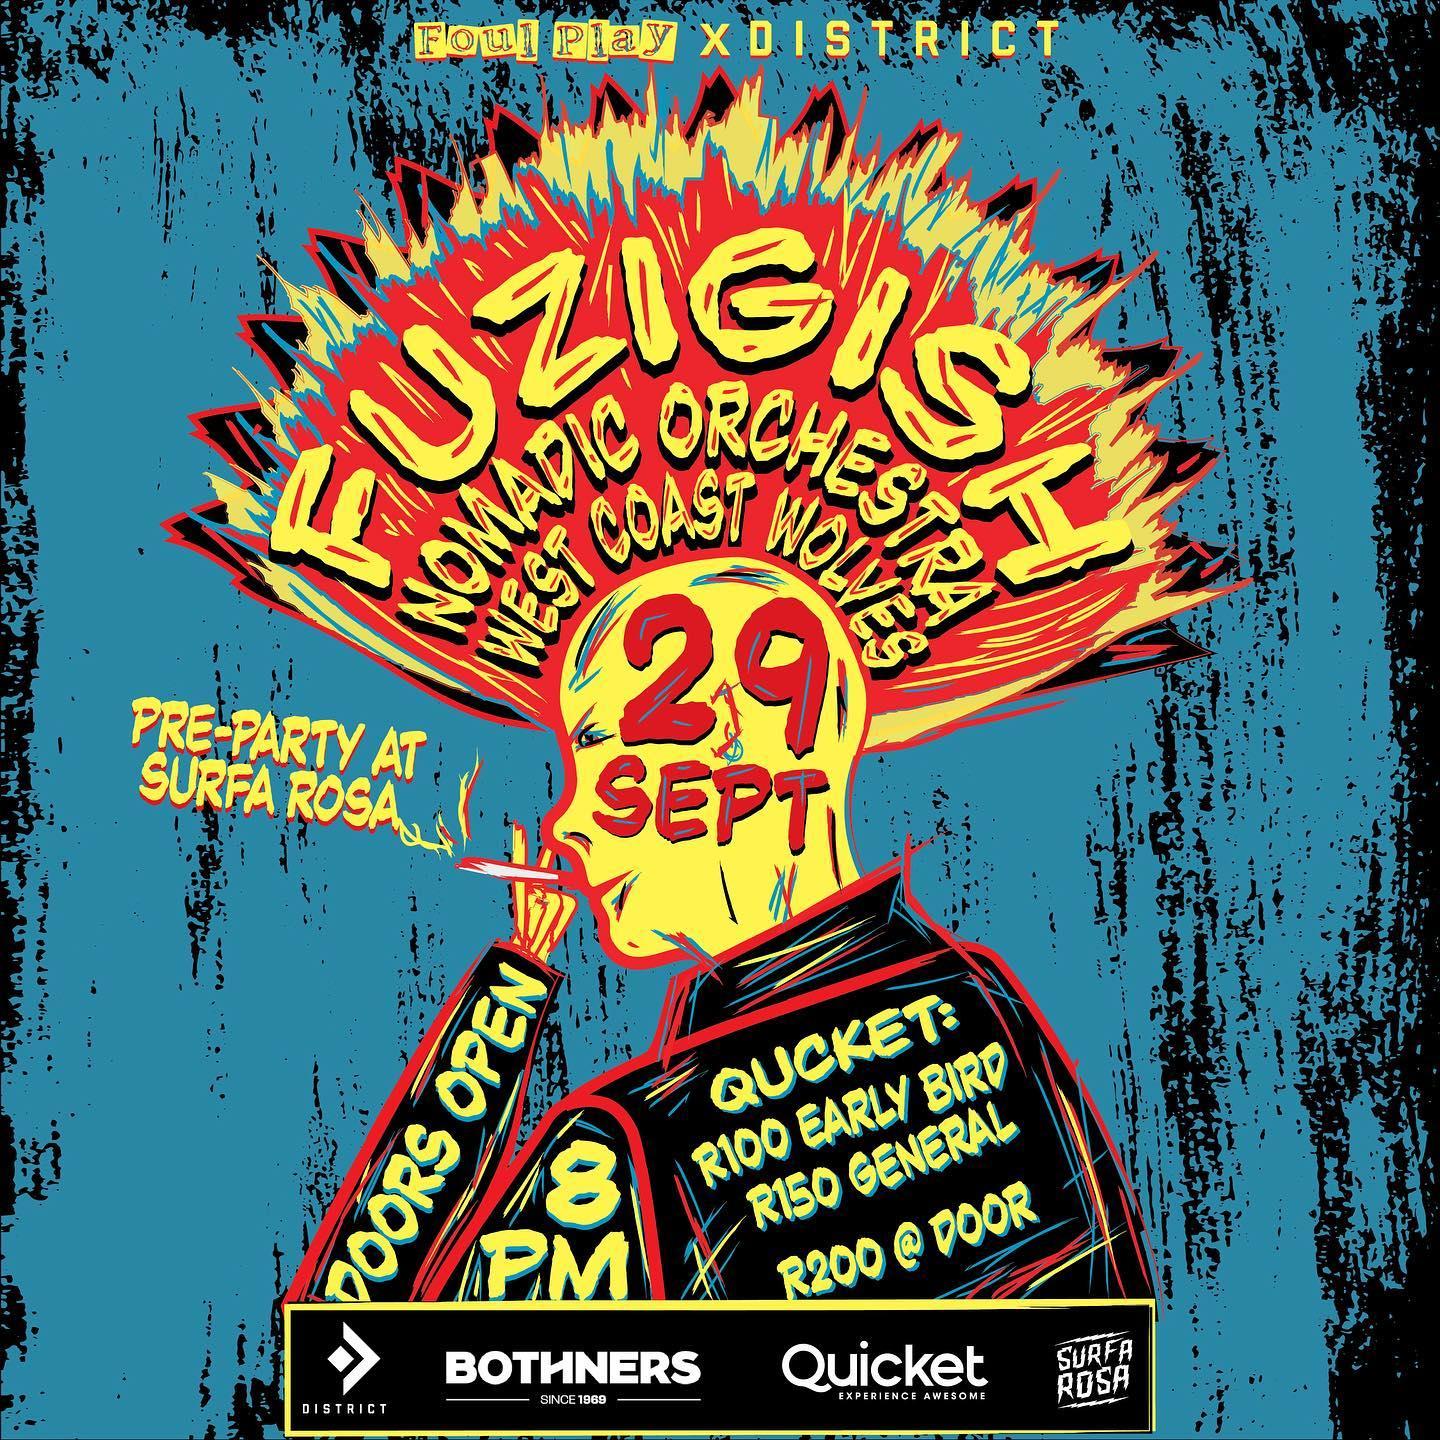 🔥 Get ready to rock as @Foulplay_Presents and @DistrictCT proudly present the LEGENDARY band, @Fuzigish, live at the end of September!

But wait, that's not all! We've got an incredible lineup featuring two more amazing acts: @NomadicOrchestra and @WestCoastWolvesCT. 😱

Bid farewell to Winter in the most epic way possible 🤘 This is a night you definitely don't want to miss!

And guess what? We've got the pre and post-party at @Surfarosact downstairs, so the good times keep rolling.

Grab your tickets now on @Quicket or simply click the link in our bio. But hurry, limited early-bird tickets are still available!

Backline proudly sponsored by @Bothnersmusicalinstruments 🎶🎸

Artwork by @Pierre_Rommelaere 🎨

See you on the 29th of September! Let's make this night one for the books. 🎉🤟 #LiveMusic #RockOn #EpicNight #Fuzigish #NomadicOrchestra #WestCoastWolvesCT #GoodbyeWinter #HelloRocknRoll